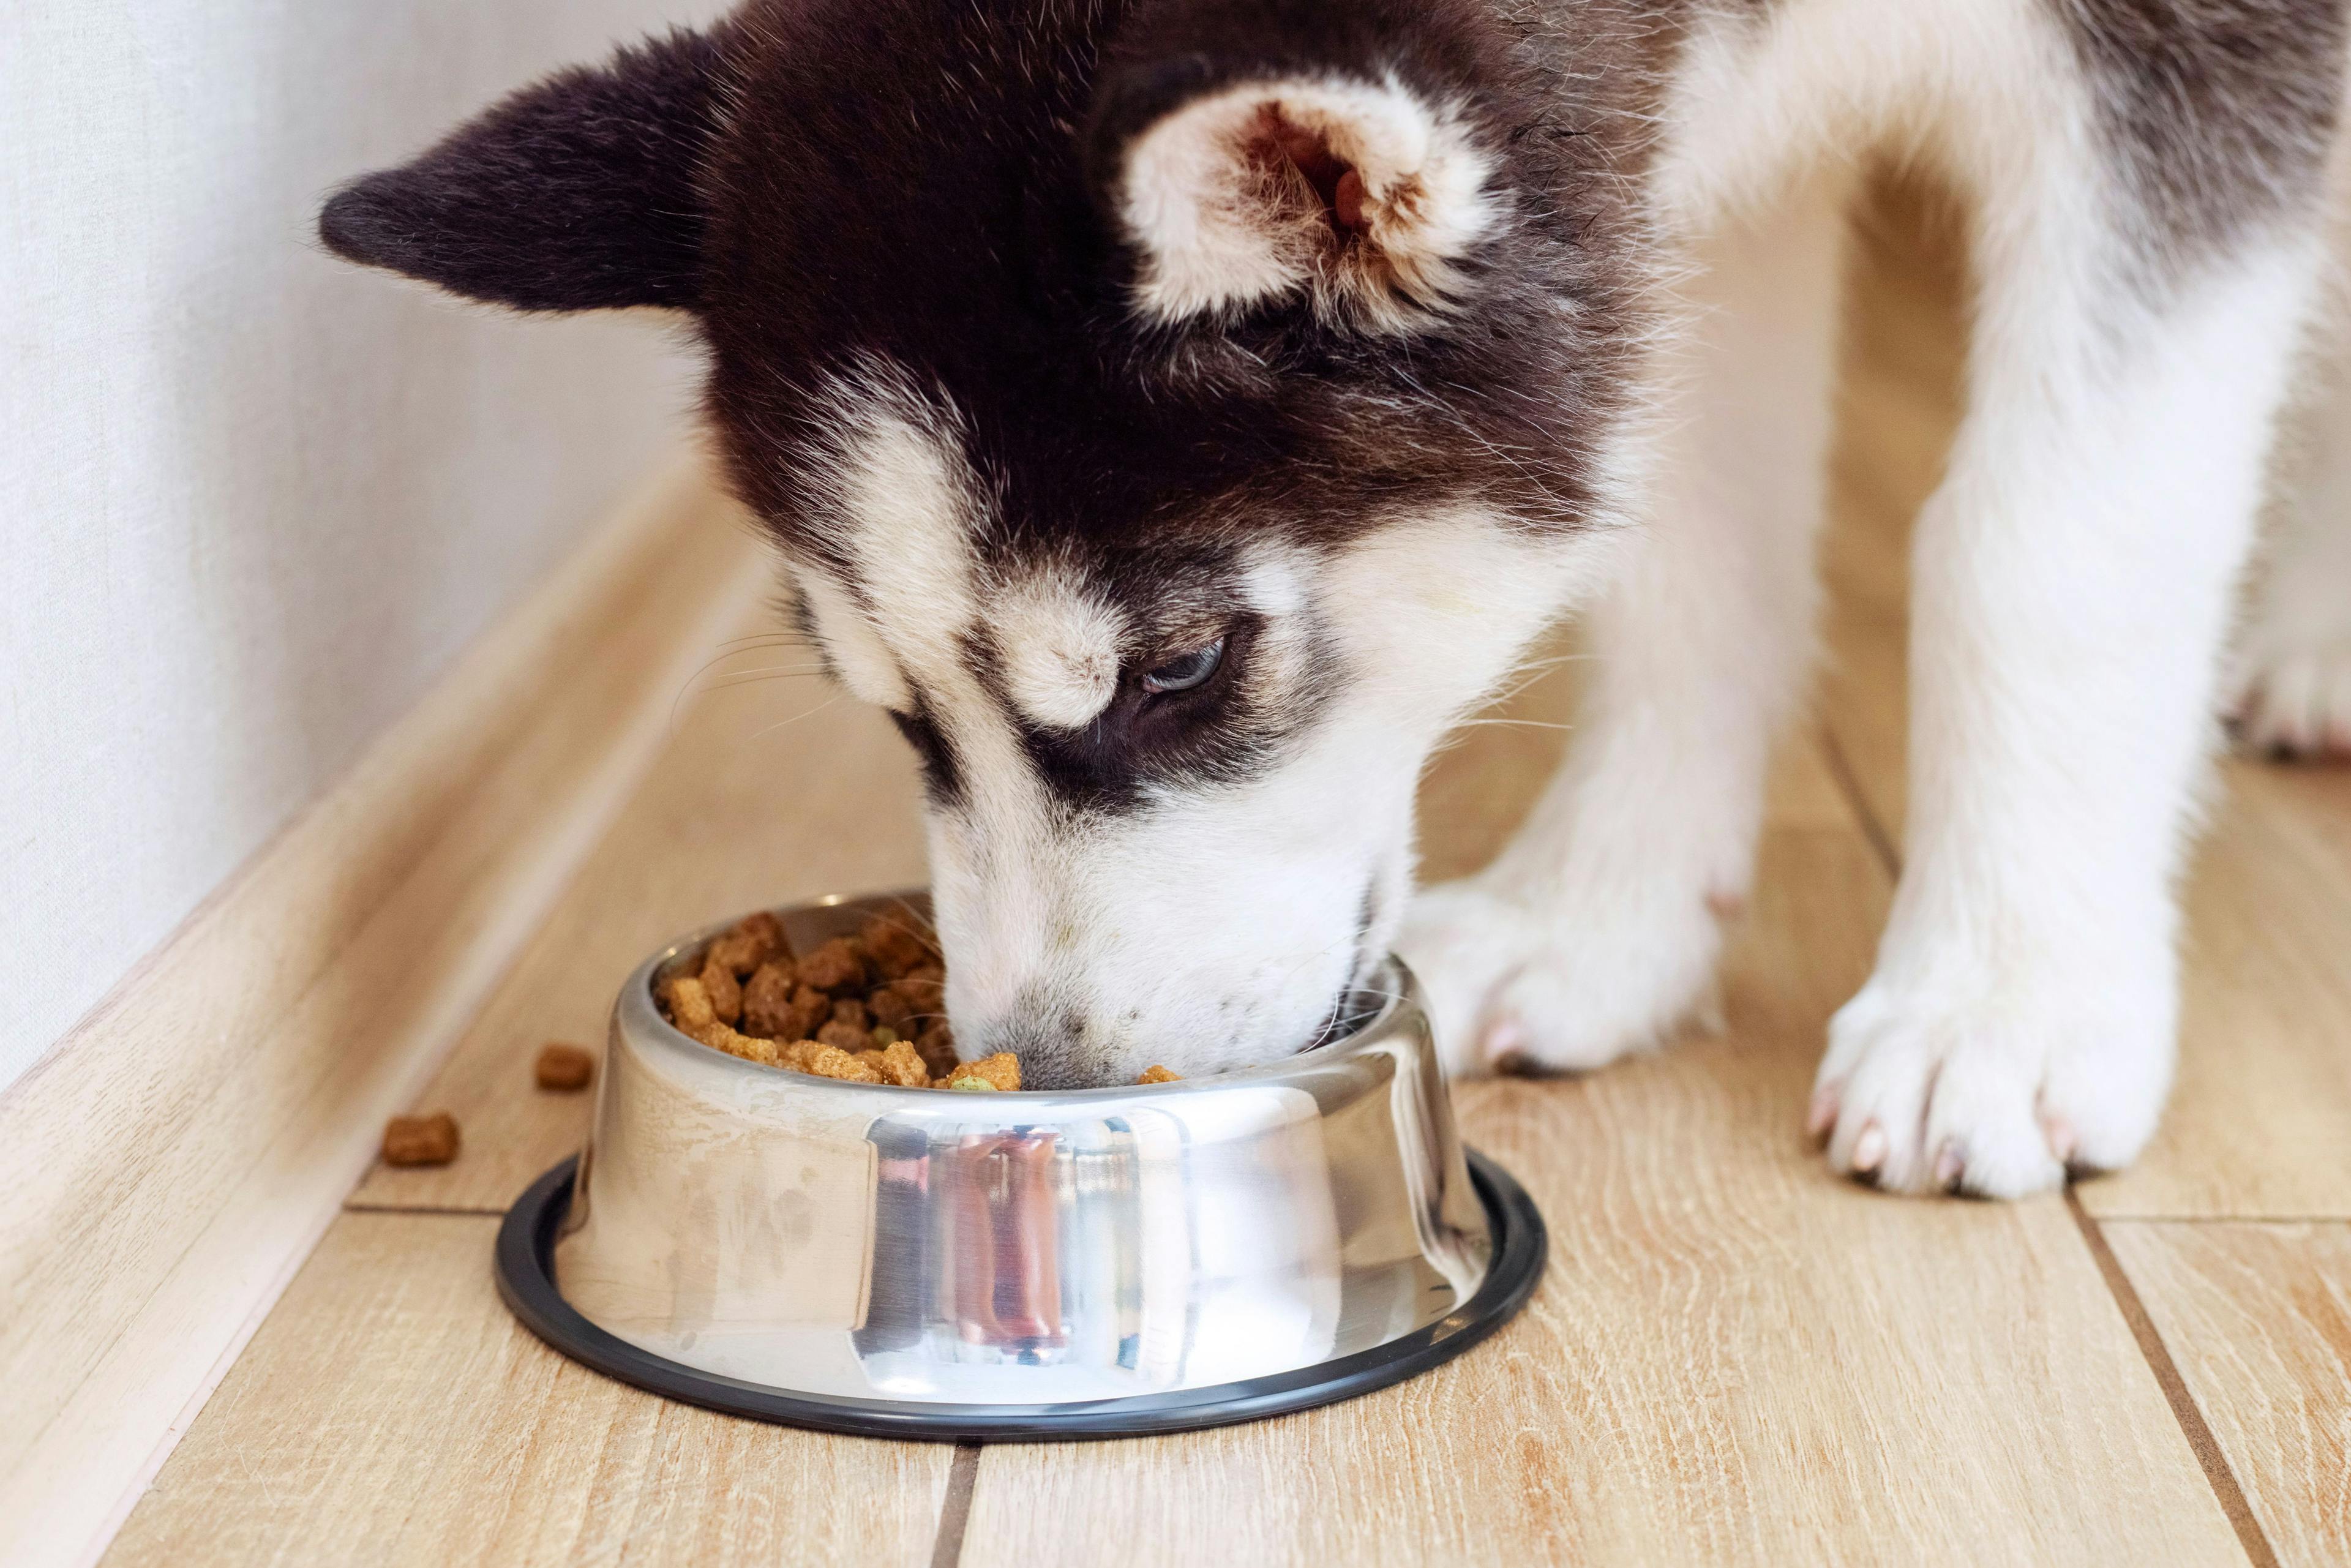 New video series informs pet owners on dog and cat nutrition